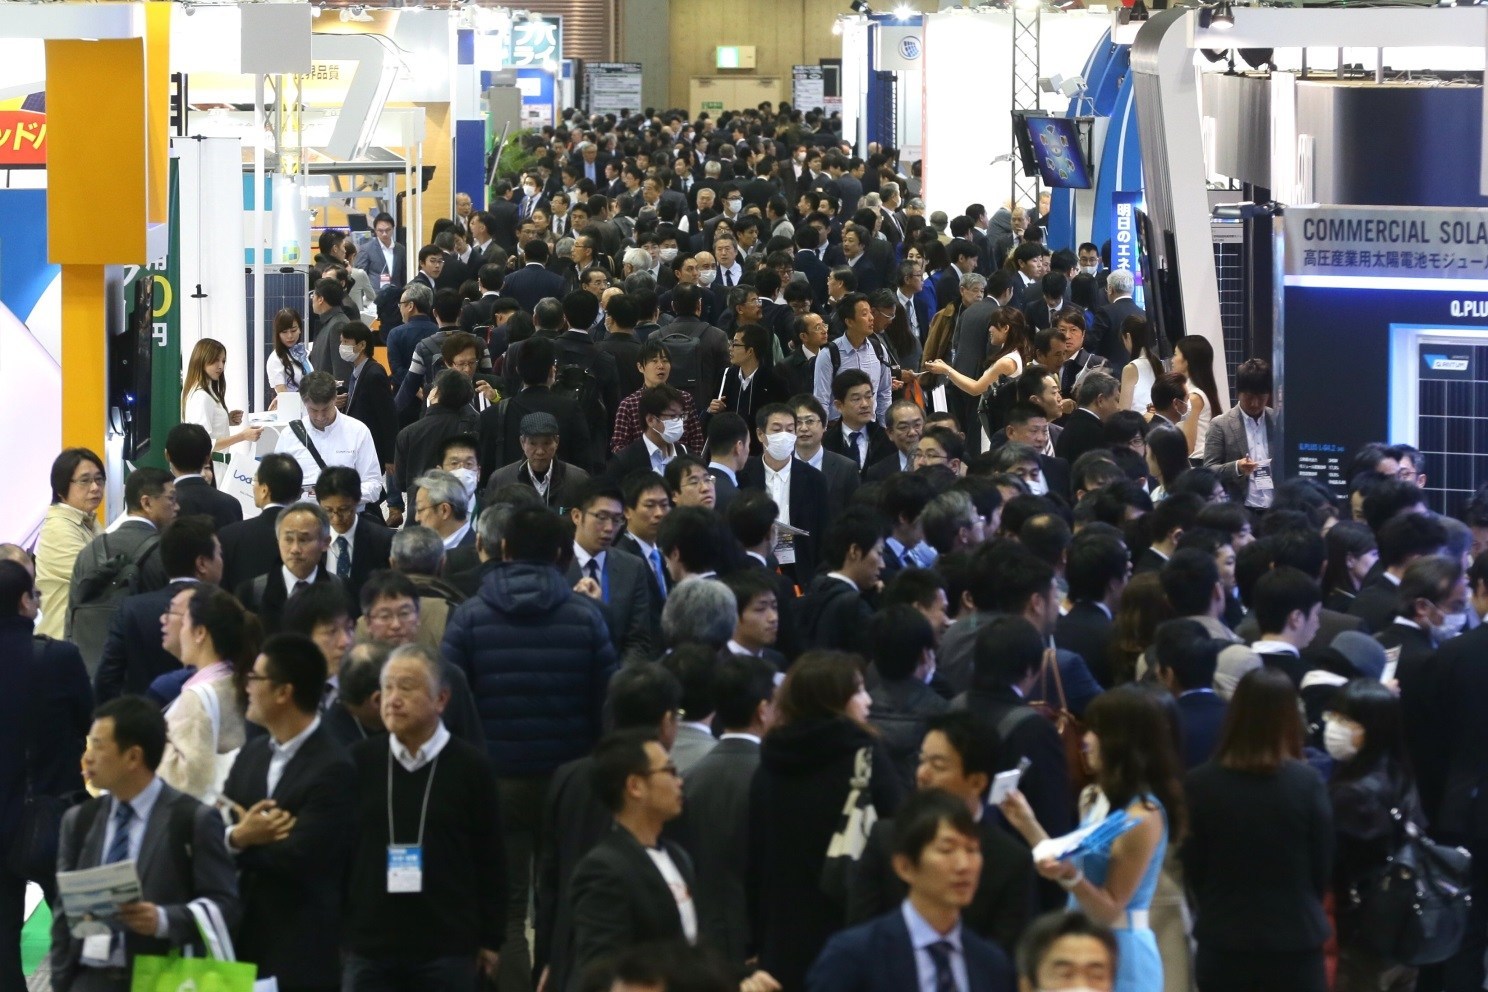 Japan's largest PV industry show, Scene from the previous show (2018)